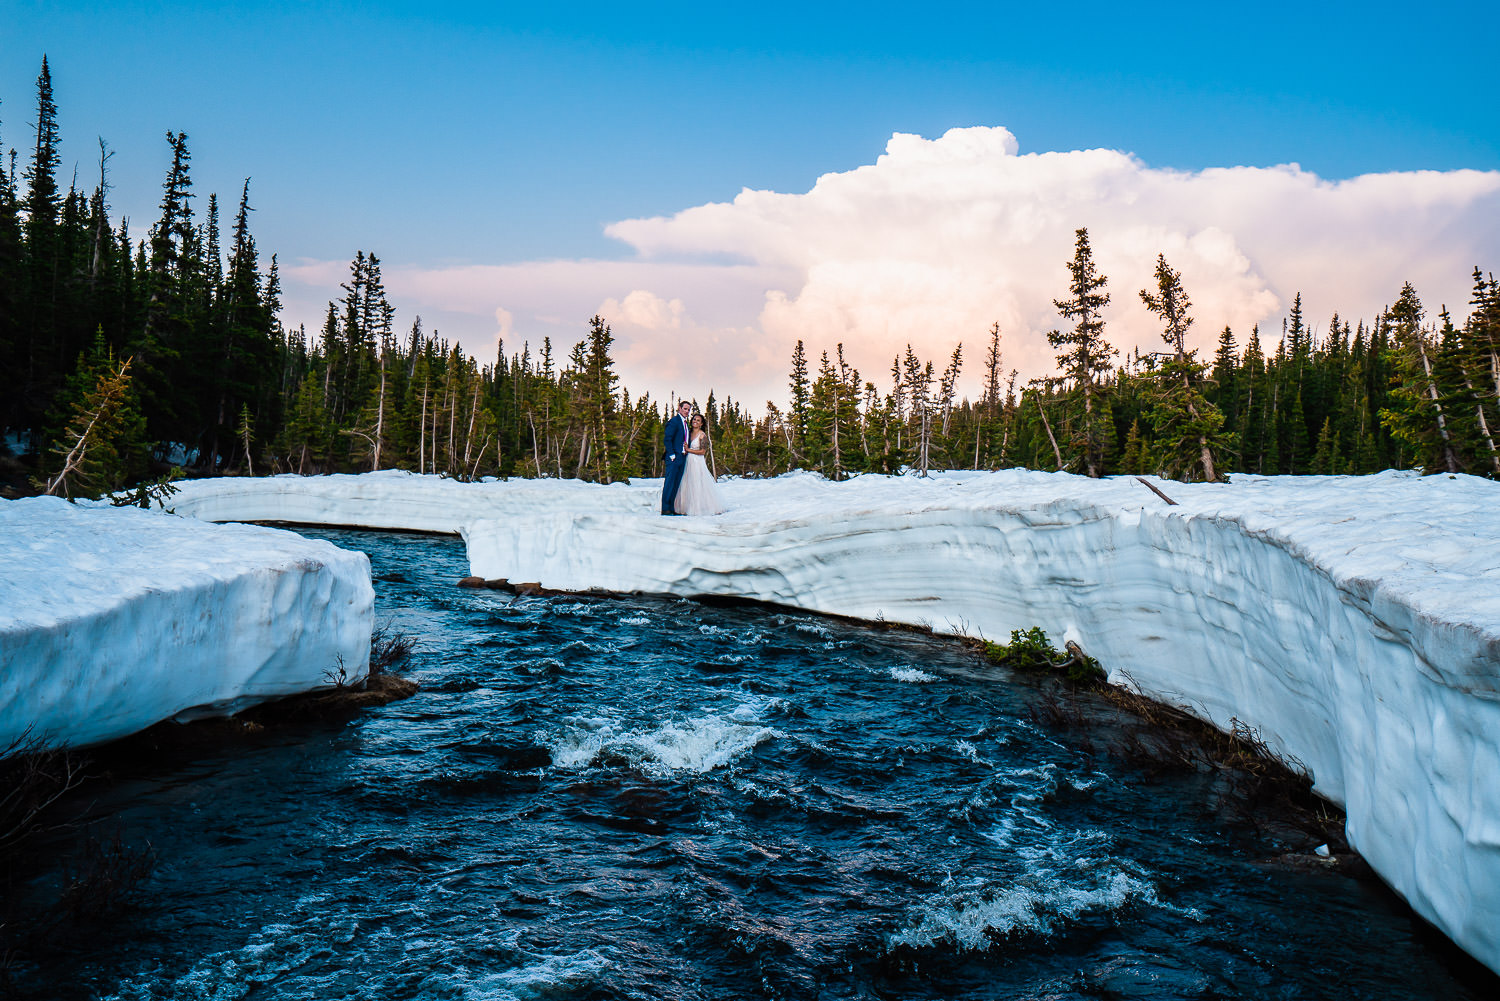 newlyweds on top of a snowy mound near a mountain stream during their Colorado winter elopement